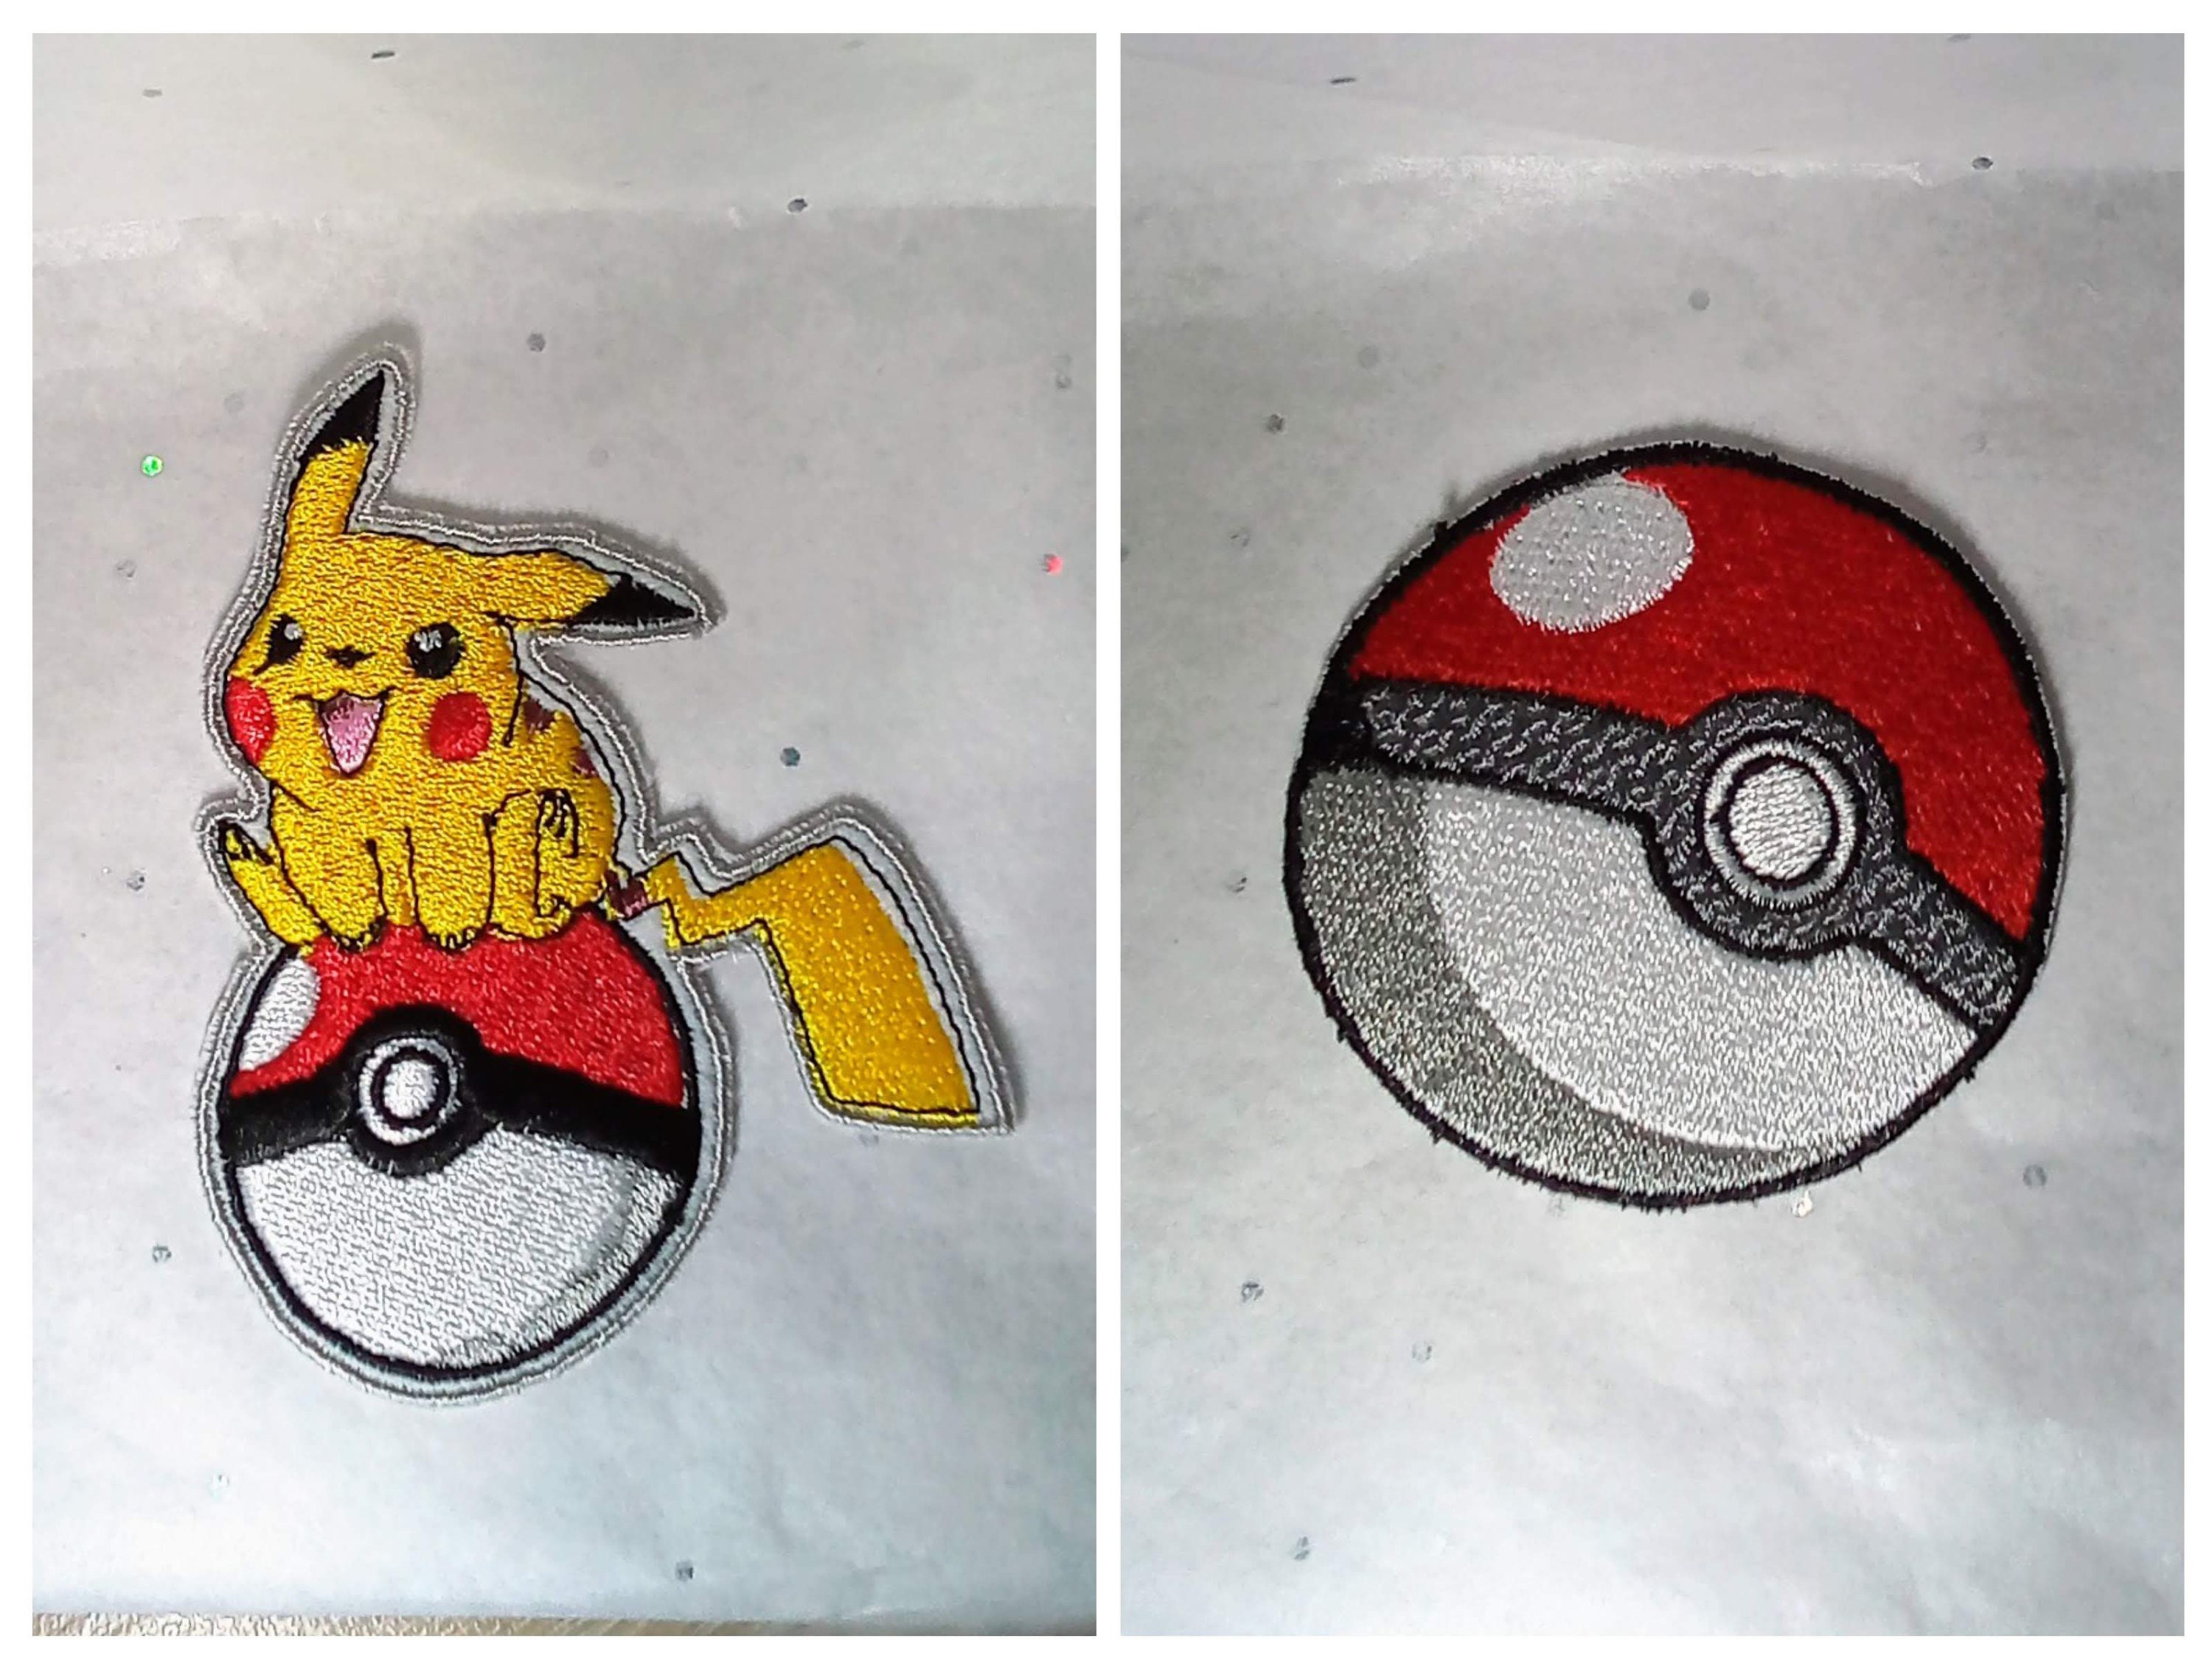 We made some more poke-military patches : r/pokemon